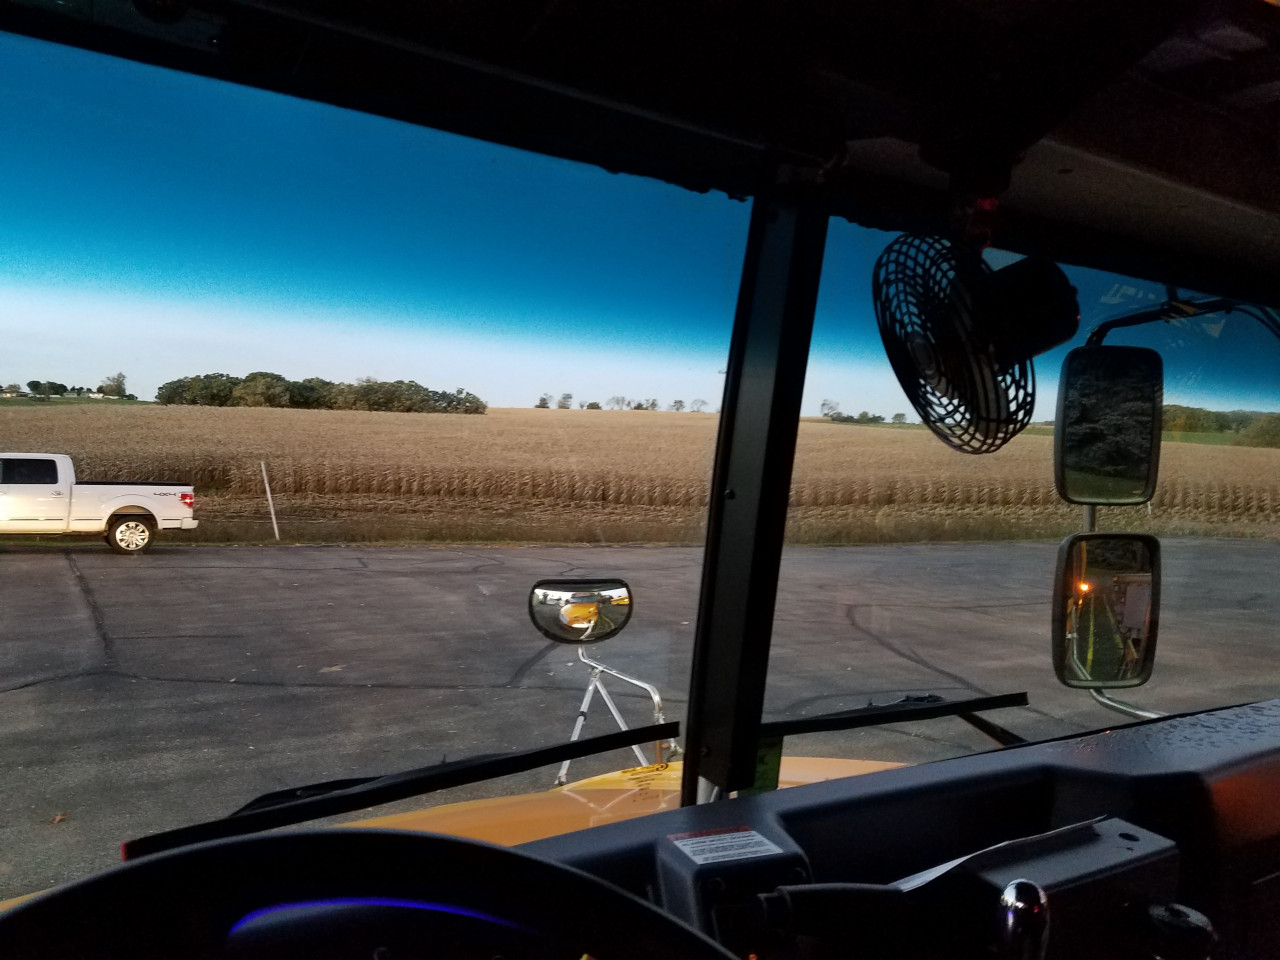 The view from the driver's seat